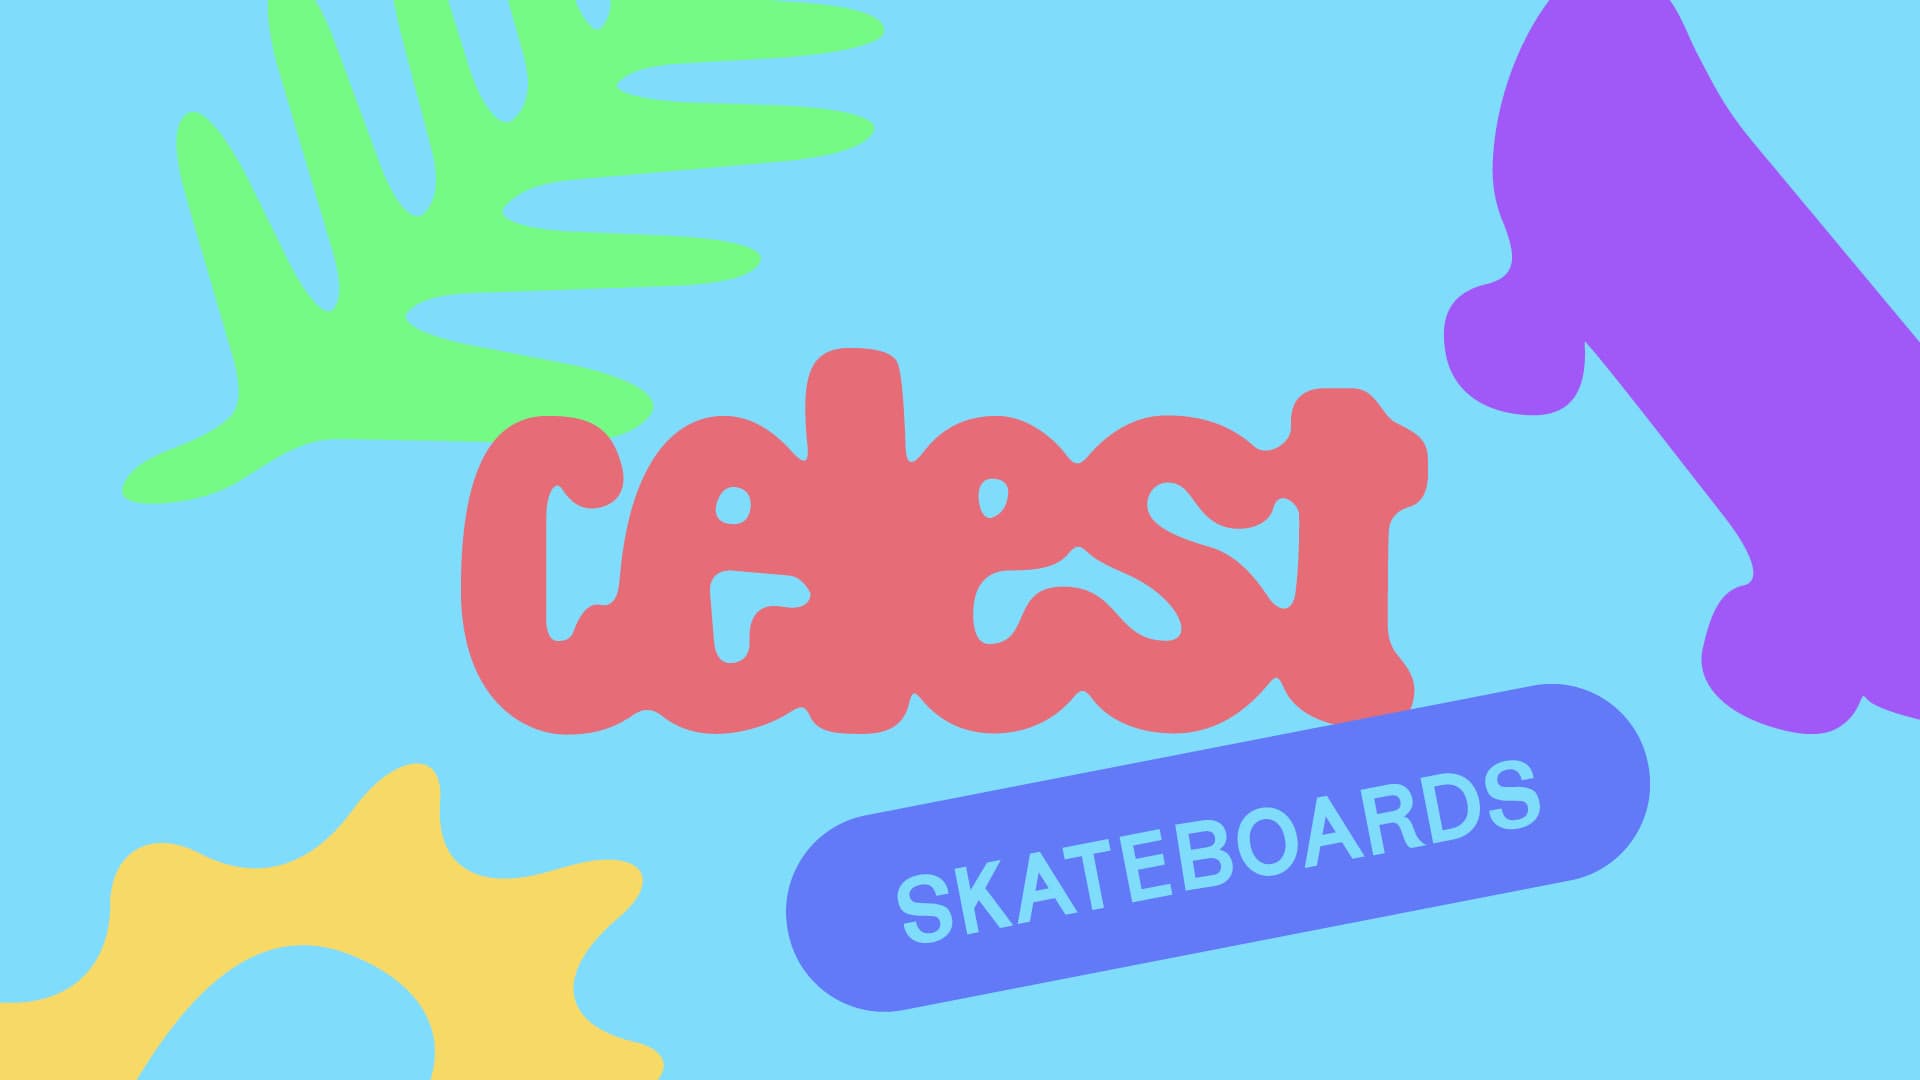 Celest Skateboards, a sustainable fusion of nature and urban culture